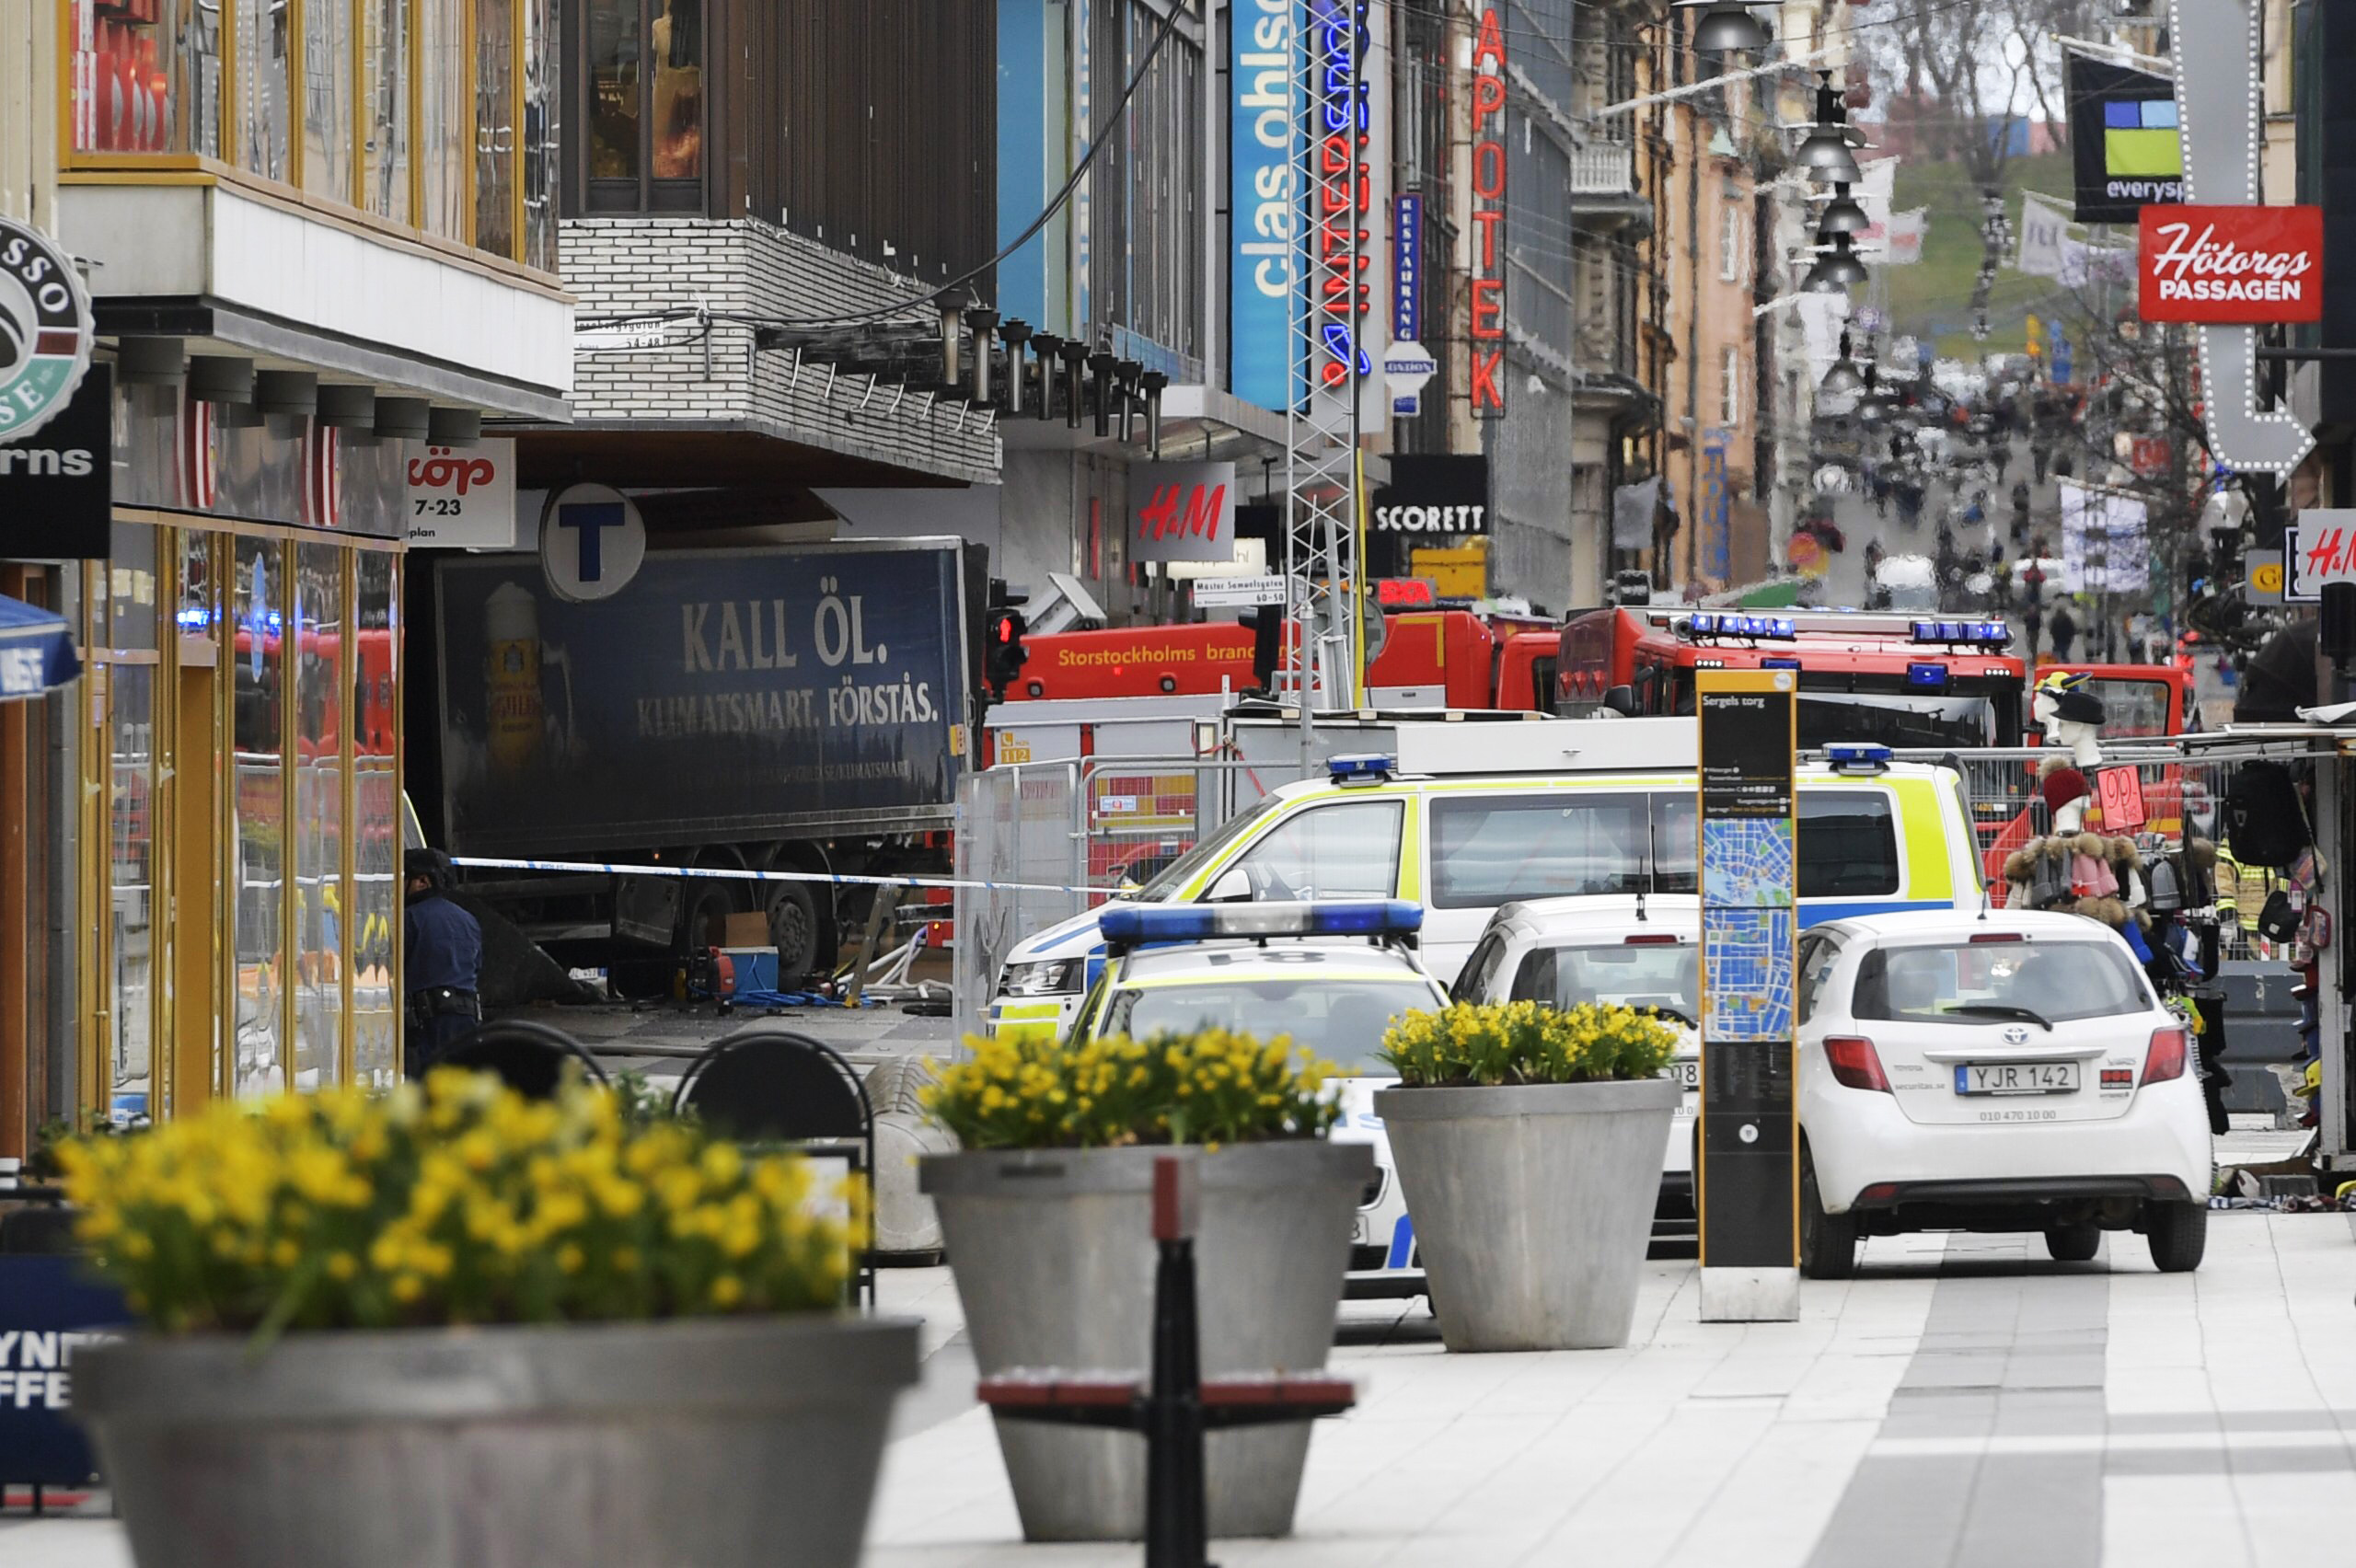 PHOTO: Swedish police and emergency services gather at the site where a truck reportedly crashed into a department store in central Stockholm, Sweden, April 7, 2017.